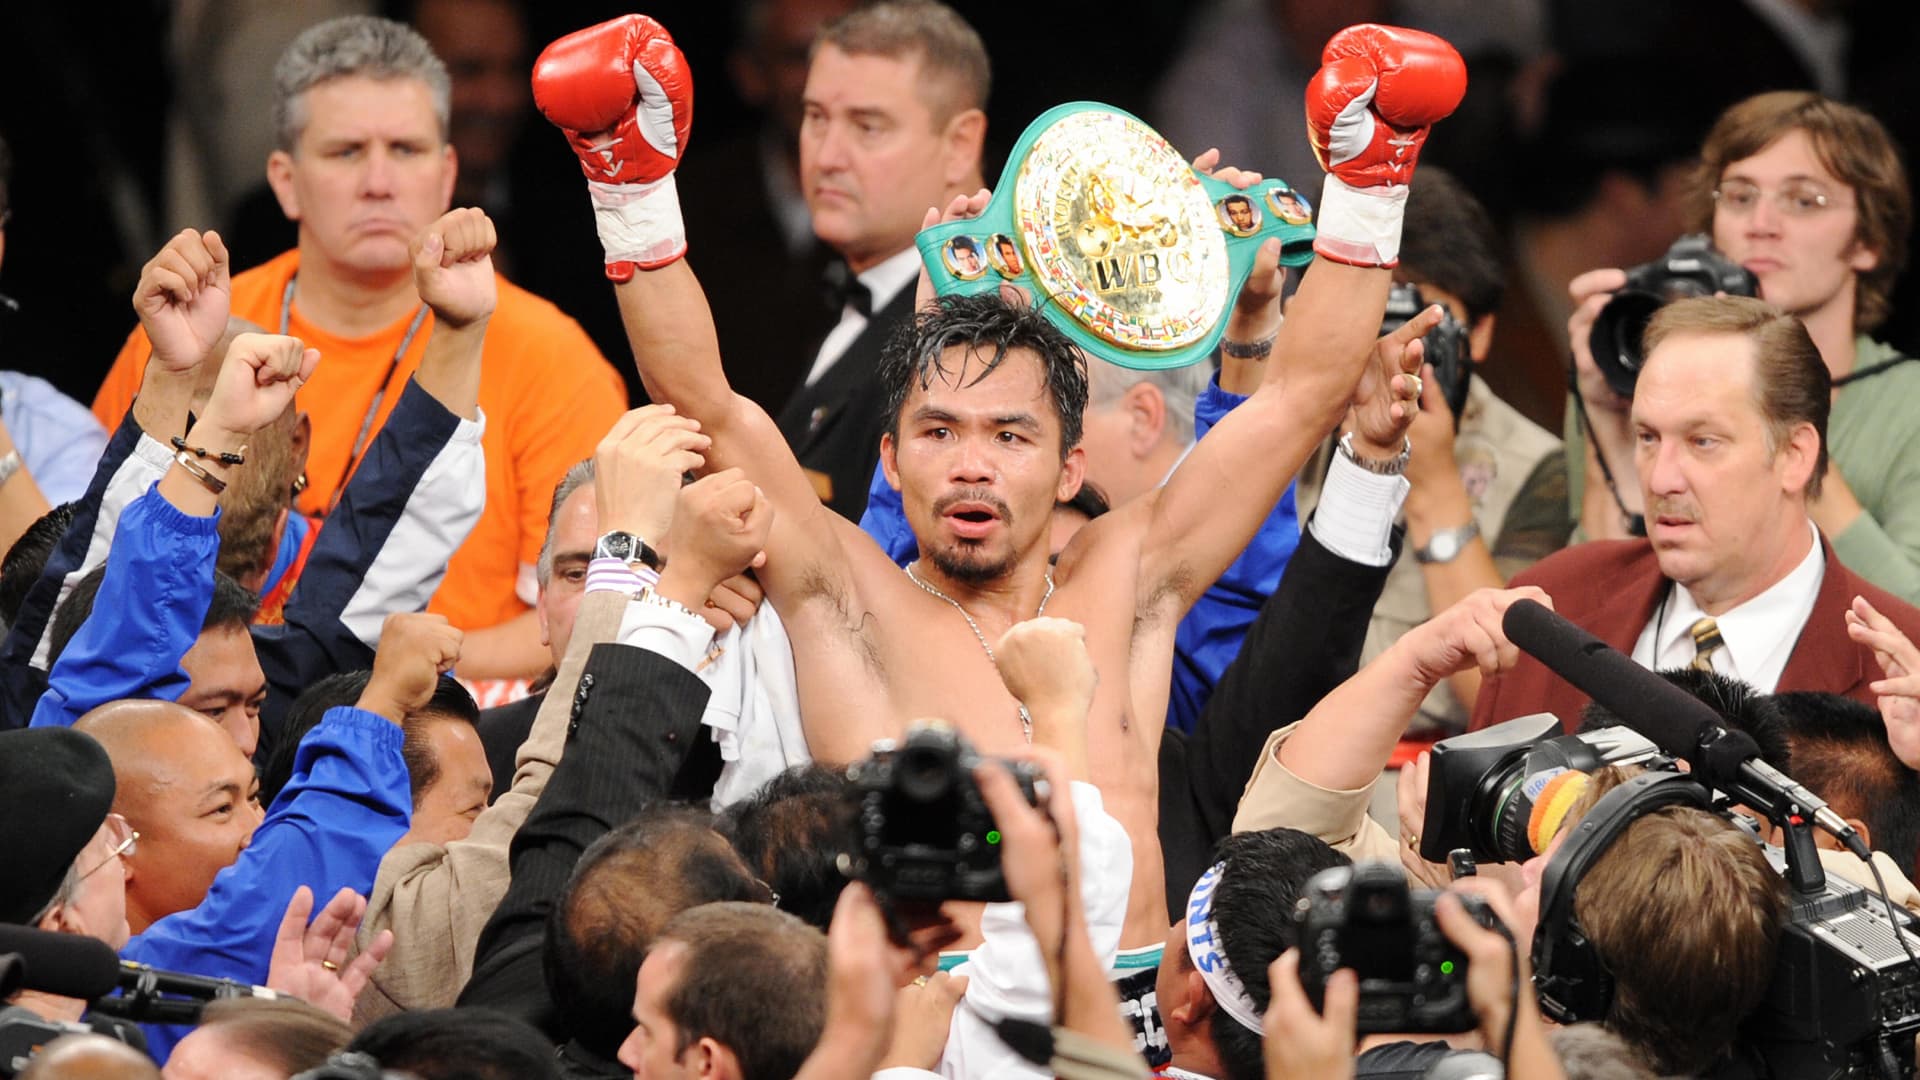 Manny Pacquiao of the Philippines (C) celebrates after defeating Oscar de la Hoya of the U.S. during their welterweights showdown at the MGM Grand Garden Arena in Las Vegas, Nevada, on December 6, 2008.